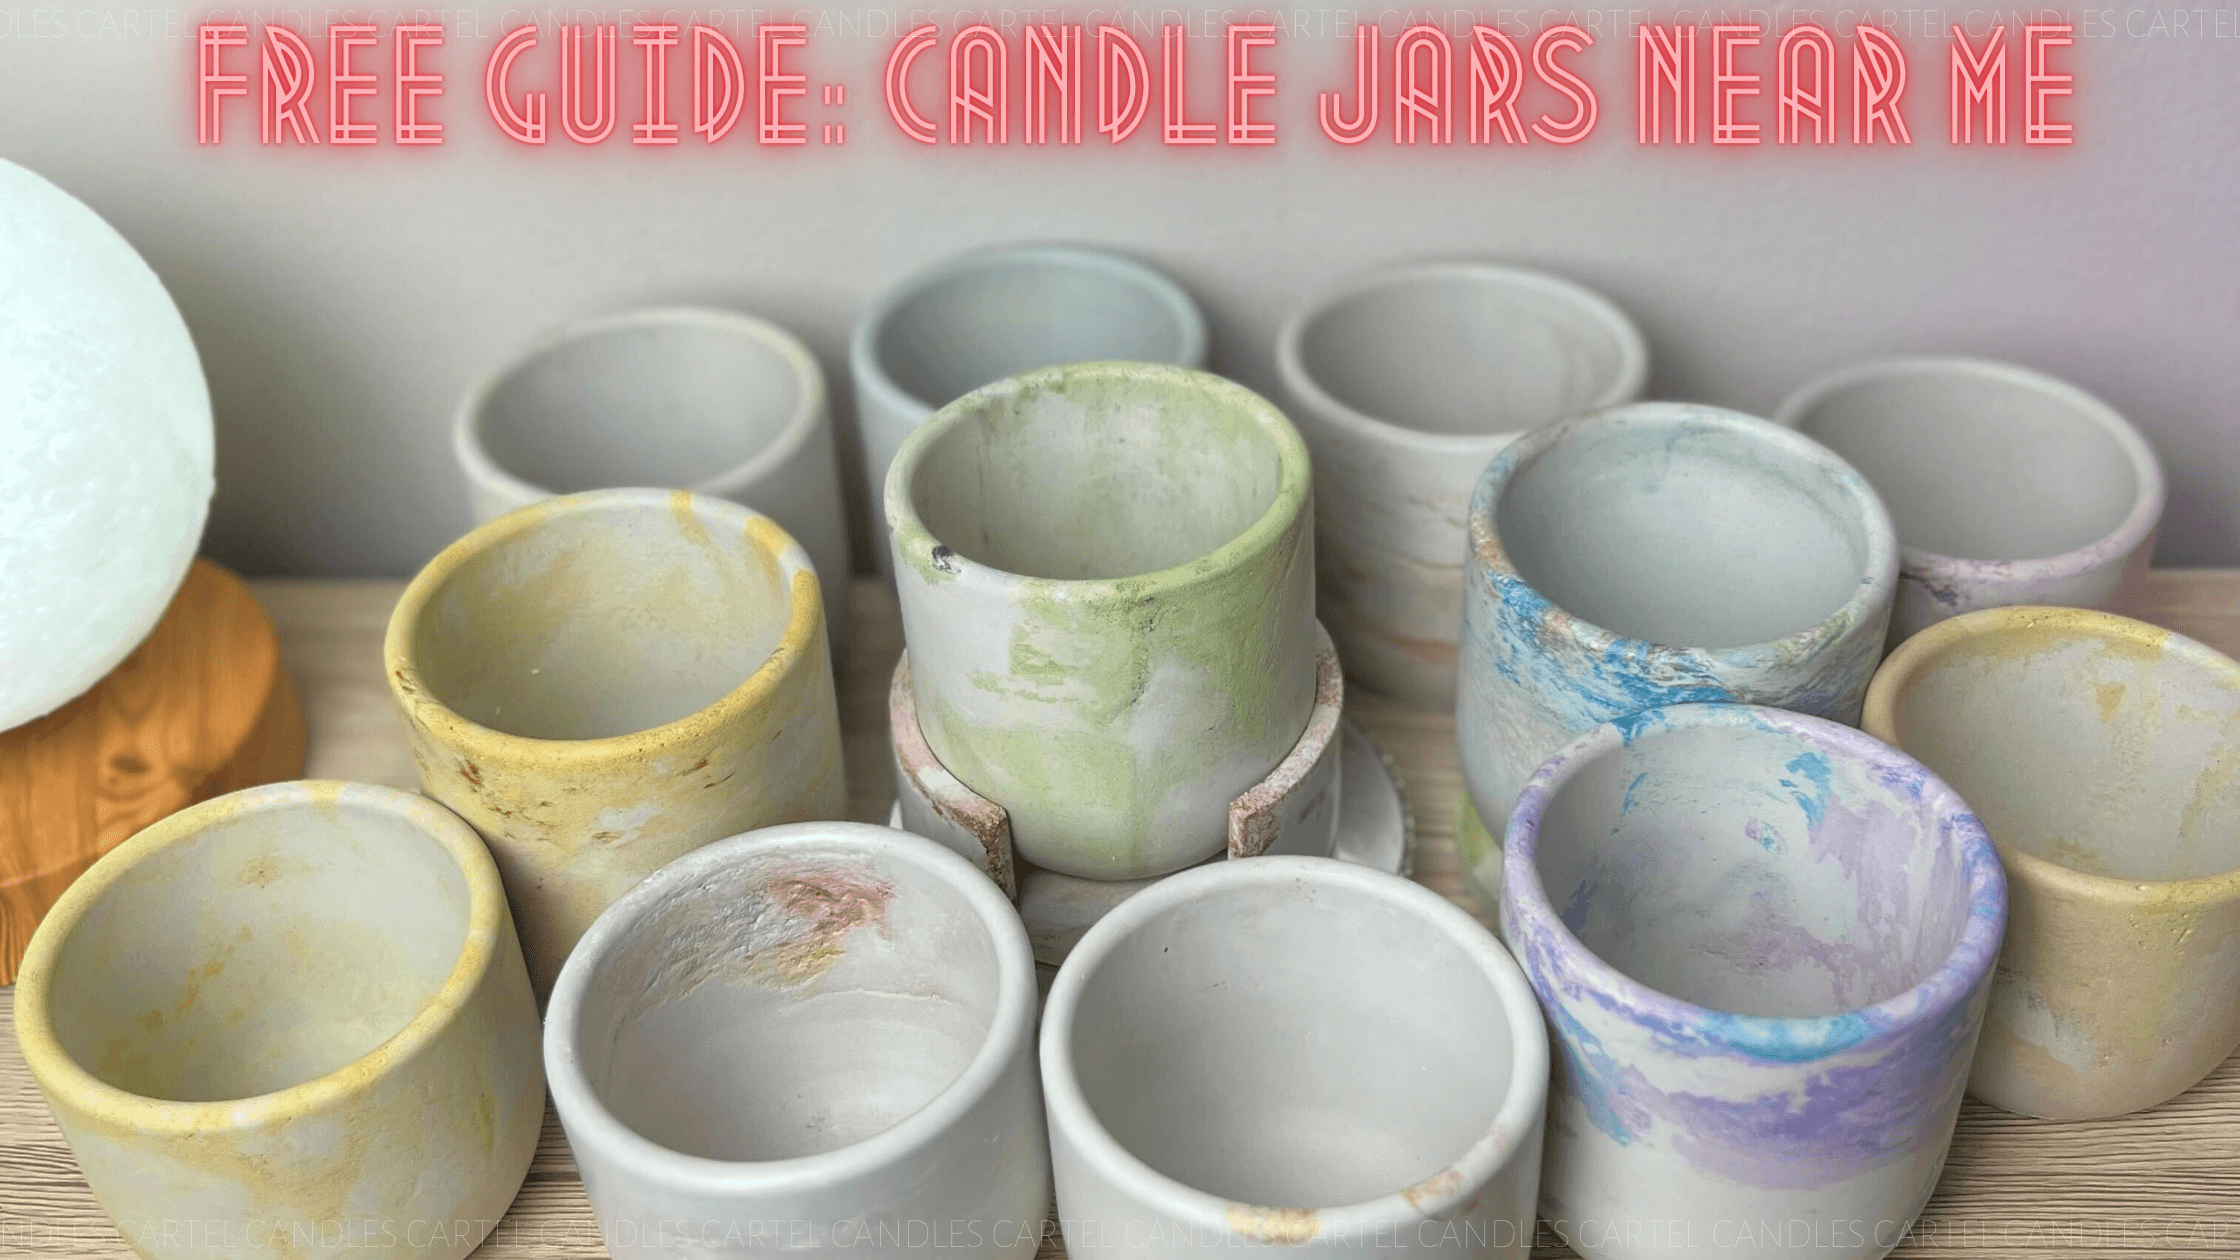 Free Guide: Candle Jars Near Me  - Blog Article